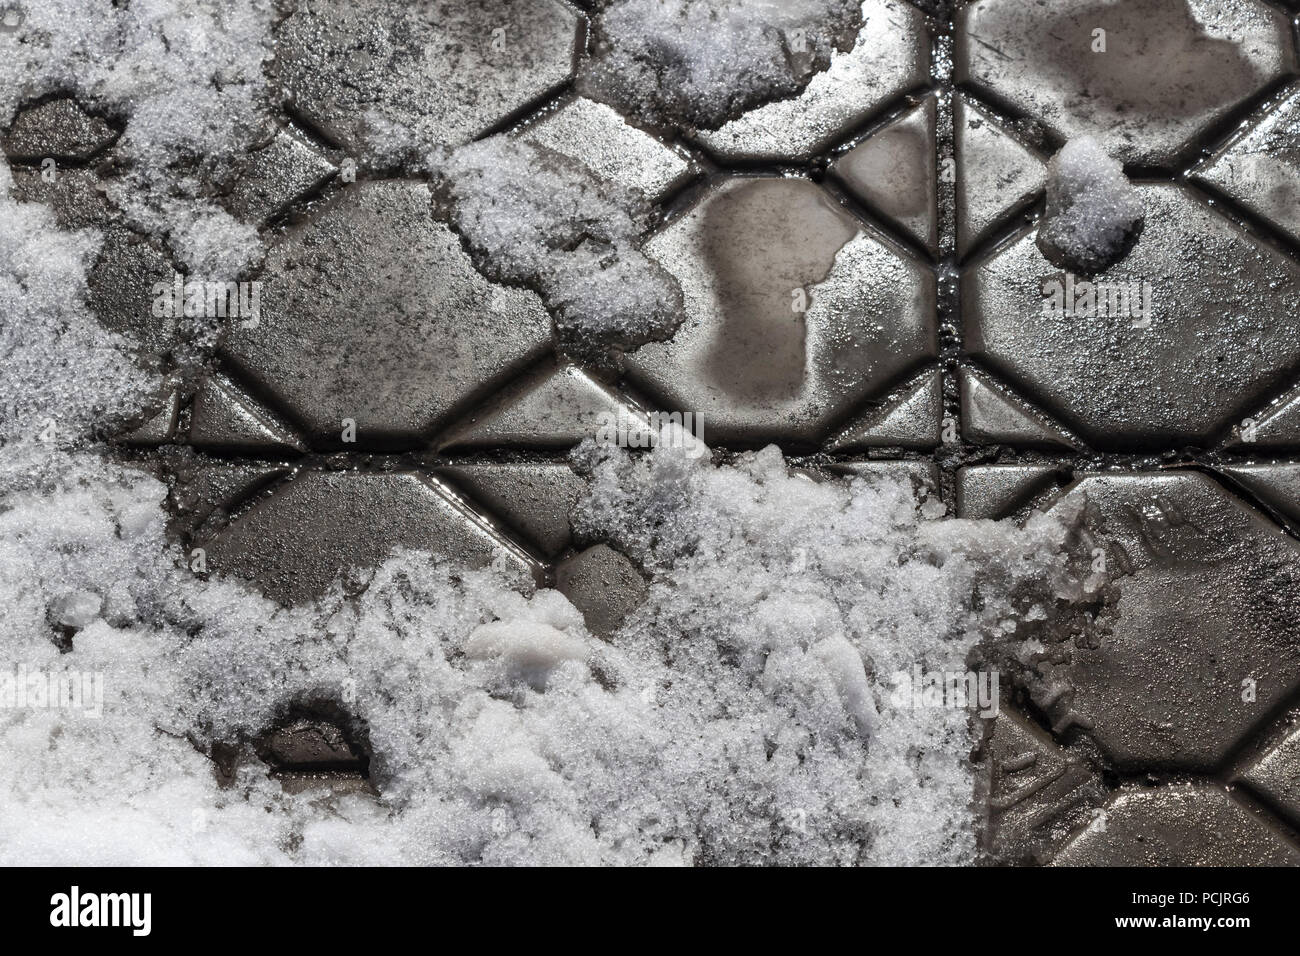 Spring thaw in the area covered with paving tiles. Stock Photo